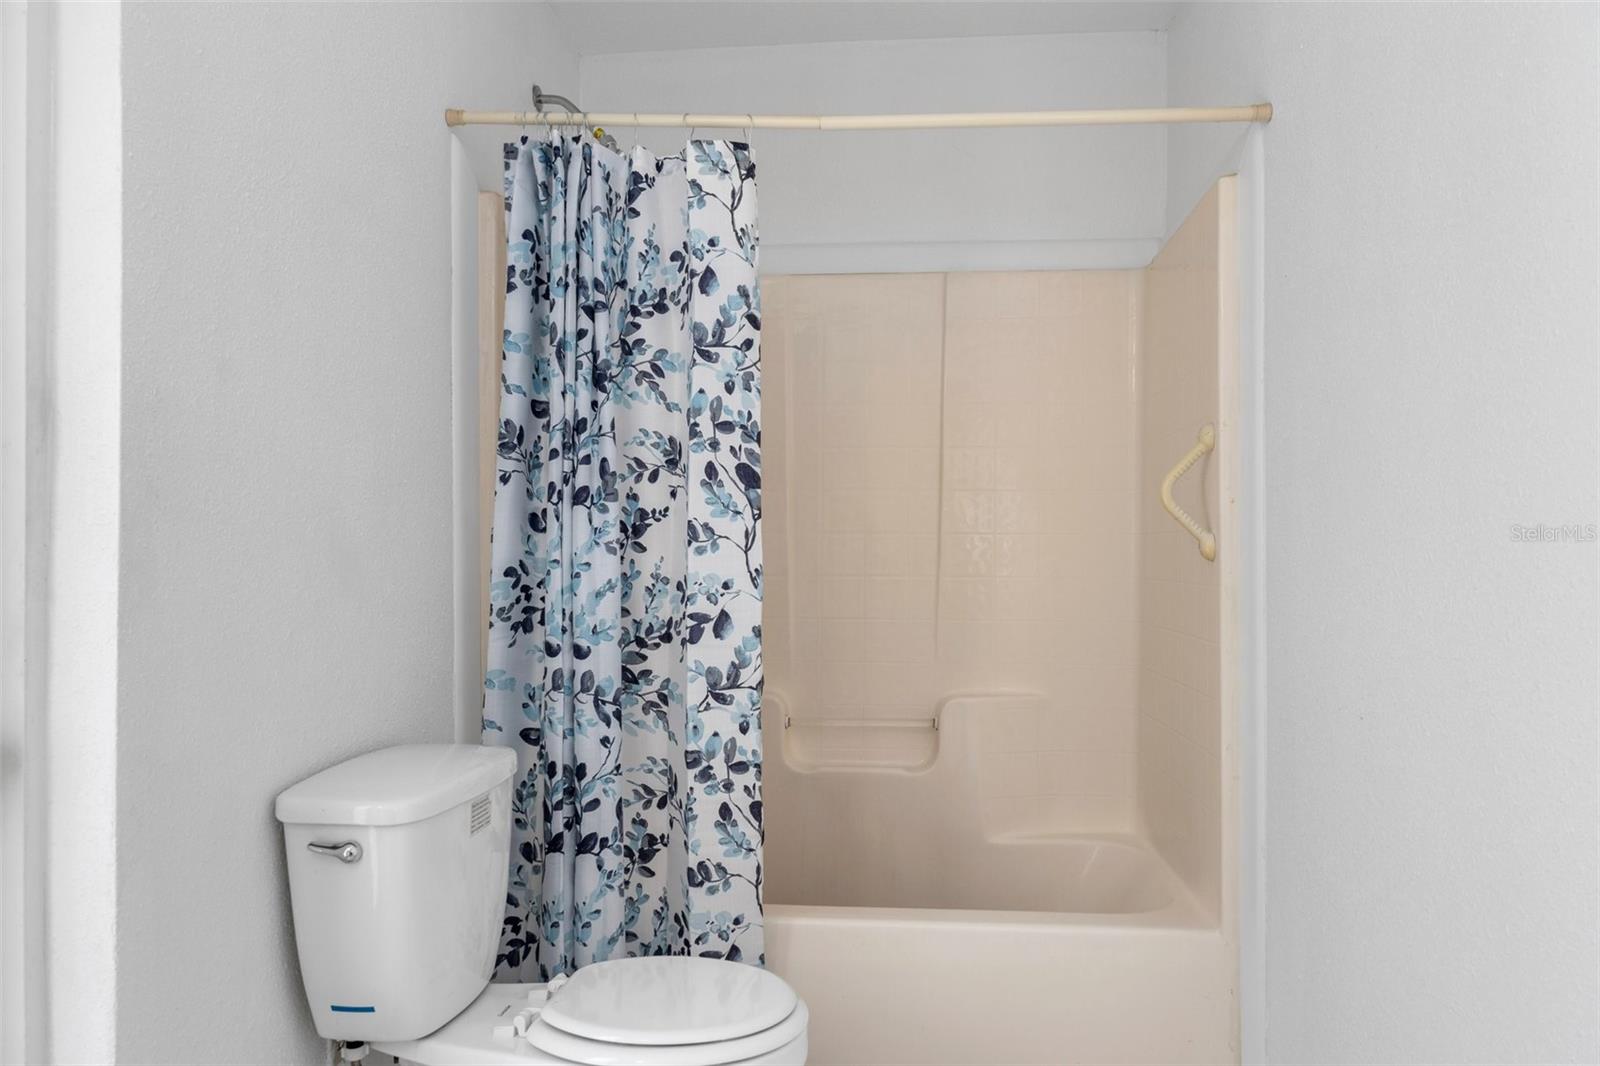 The Master Bathroom has a tub shower combo